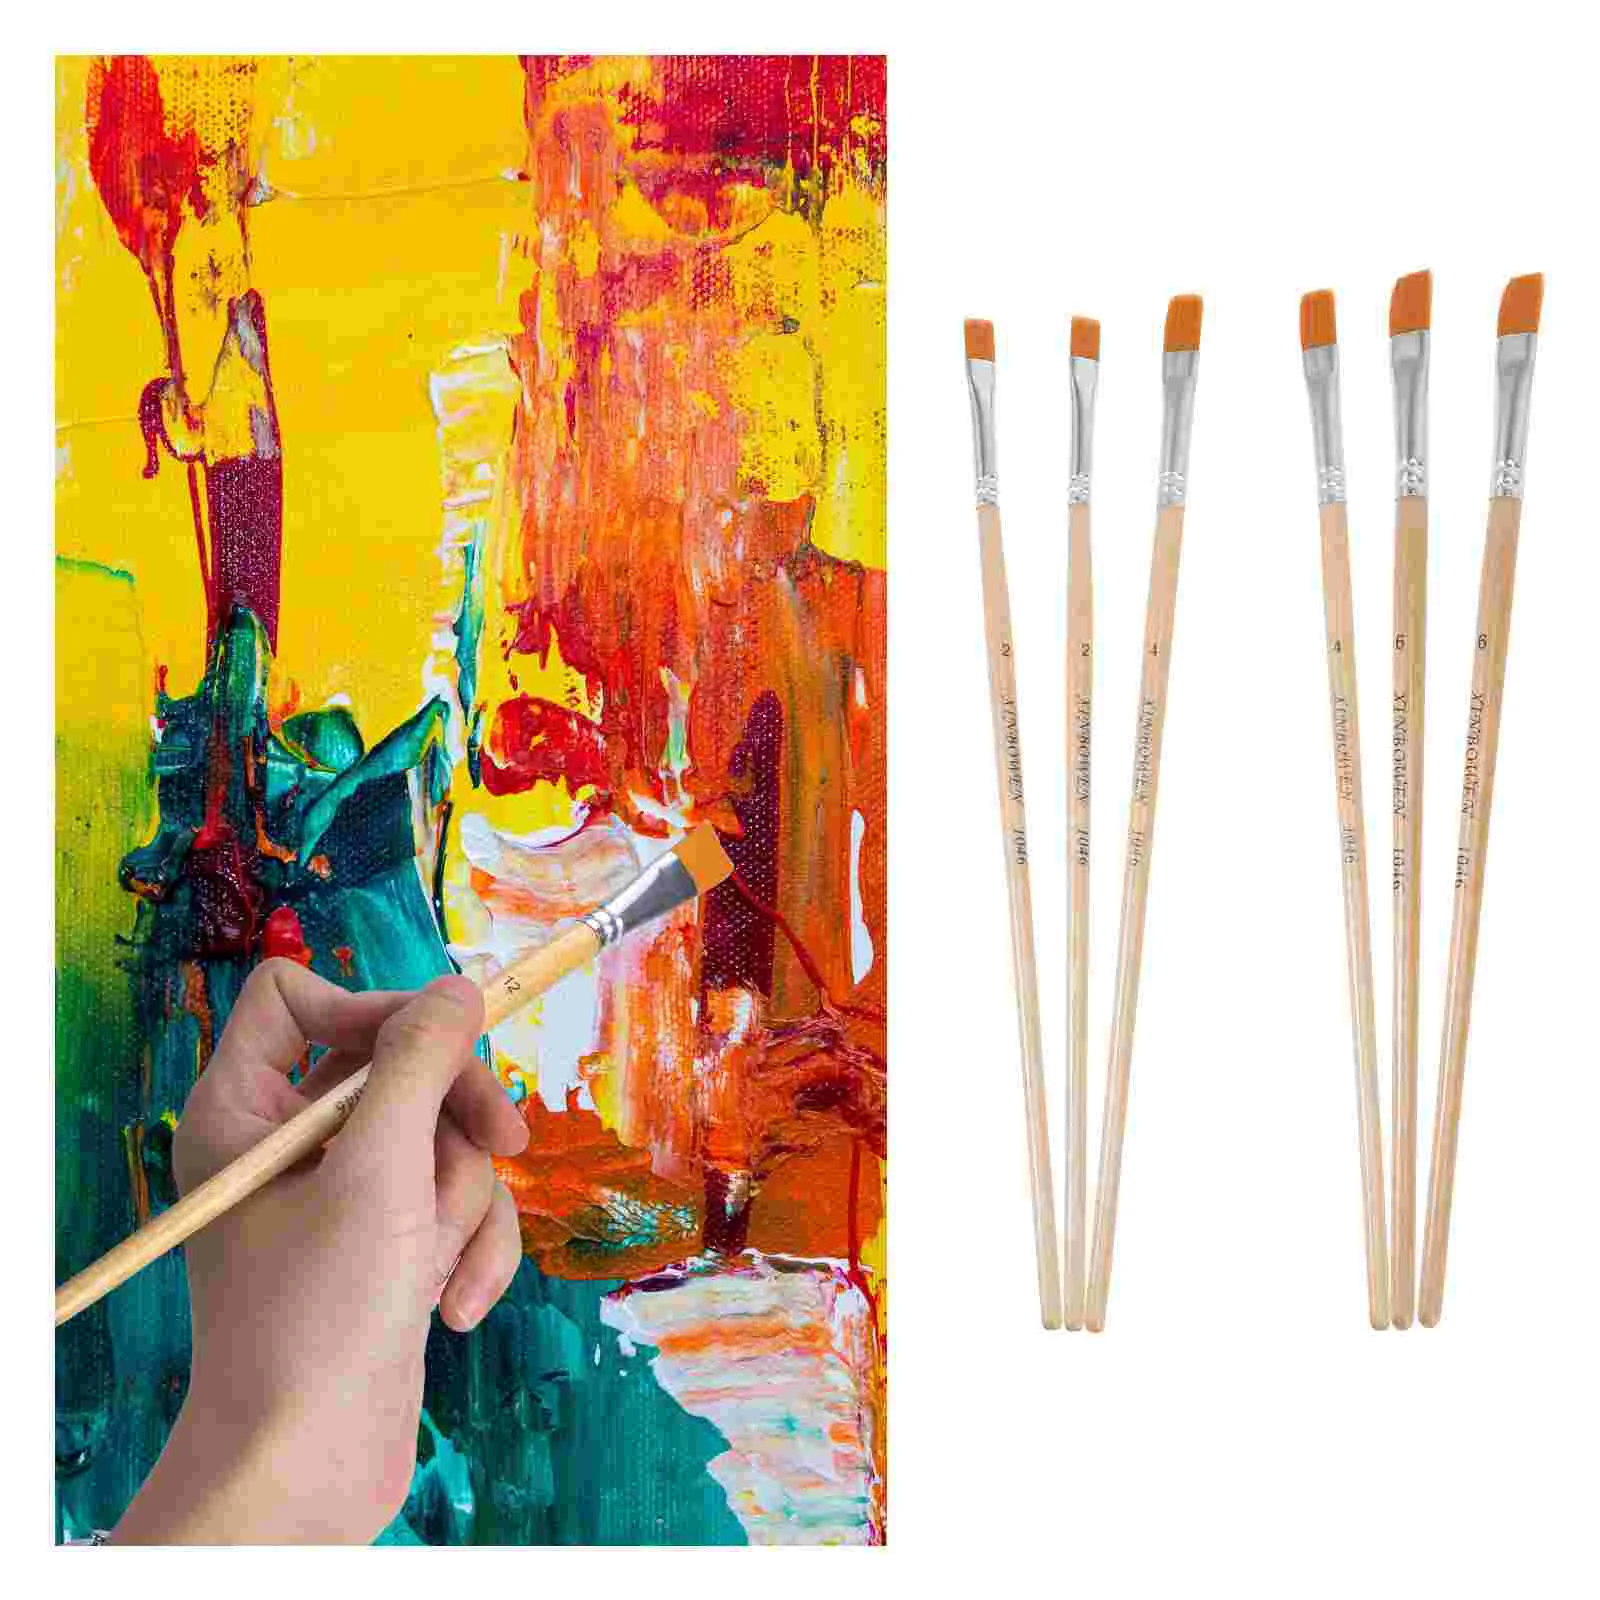 

12Pcs Paint Brushes Nylon Hair Brushes Art Flat Head Pens Painting Tool for Watercolor Oil Painting(Champagne)